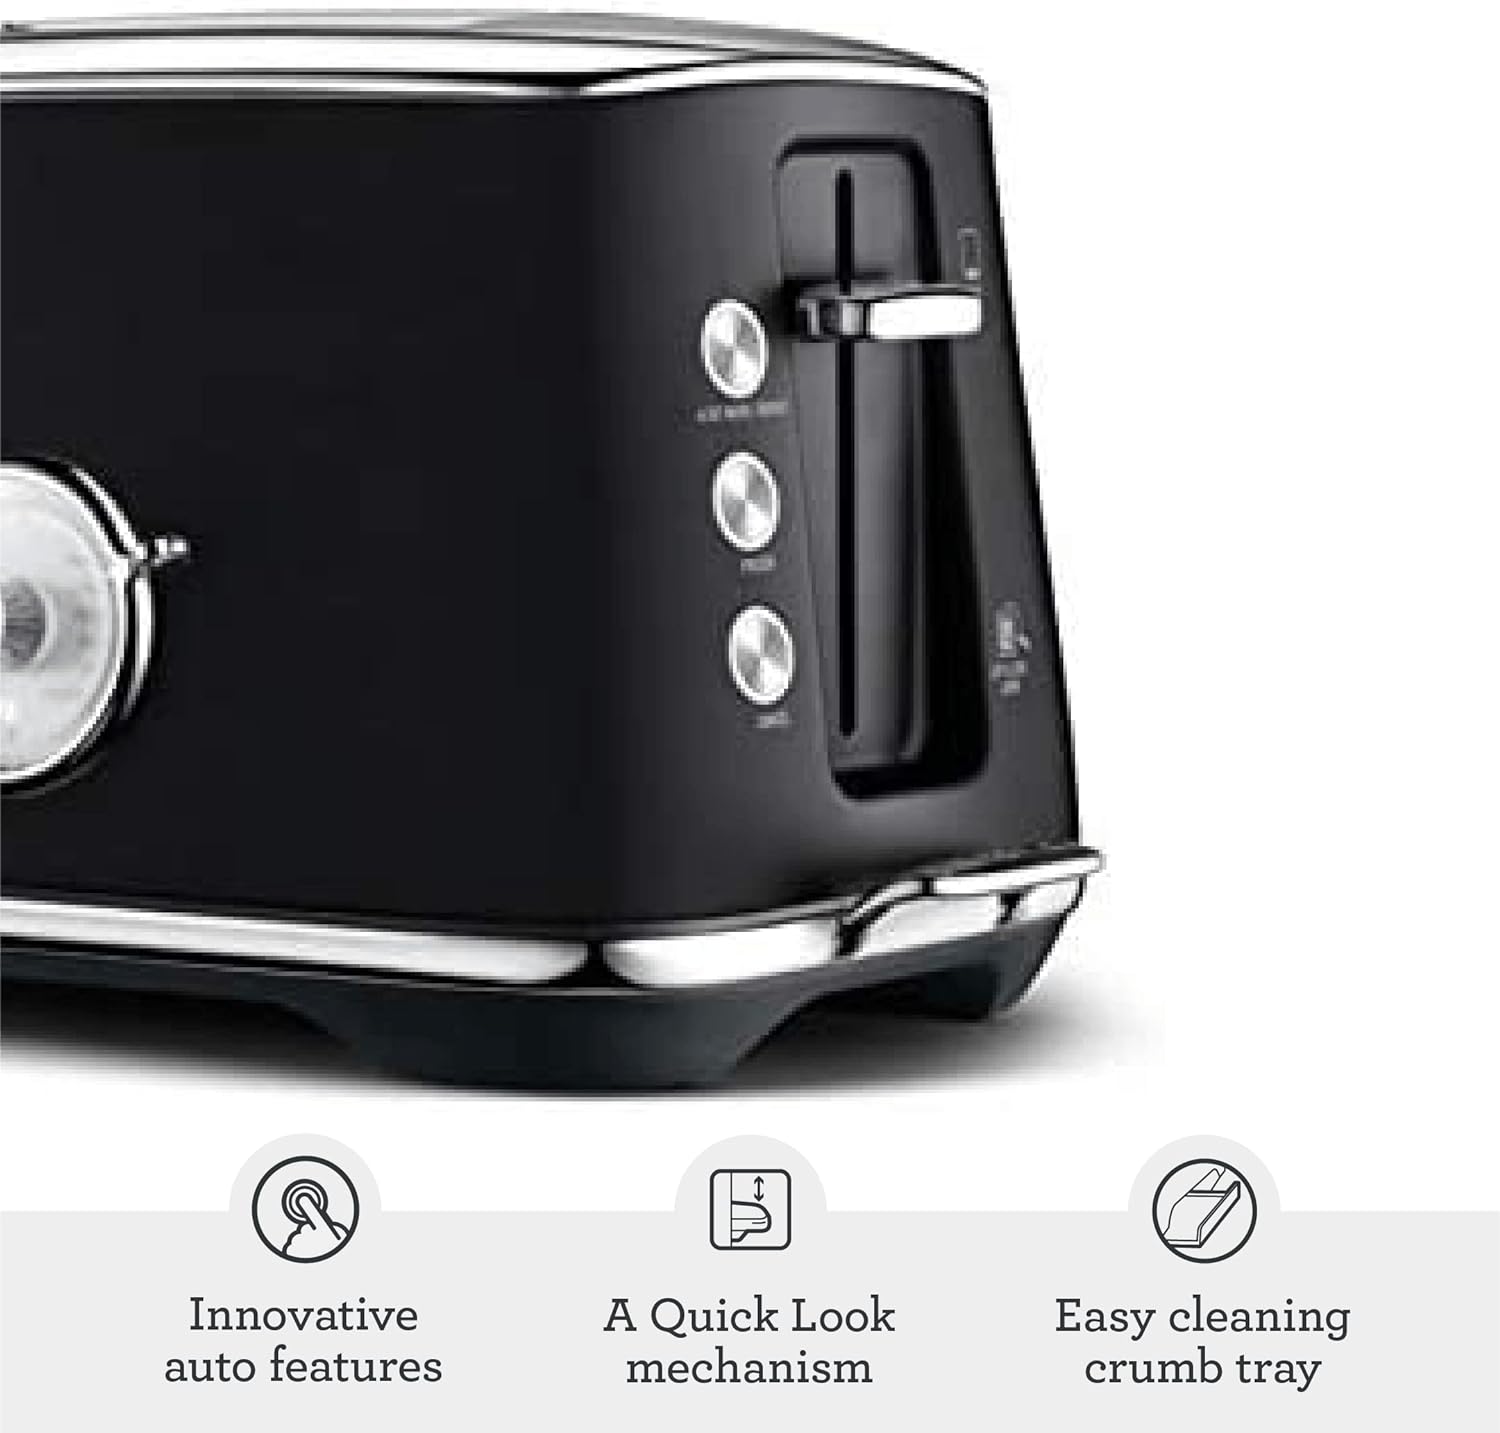 Sage The Toast Select™ Luxe Toaster Black | STA735BTR4GUK1